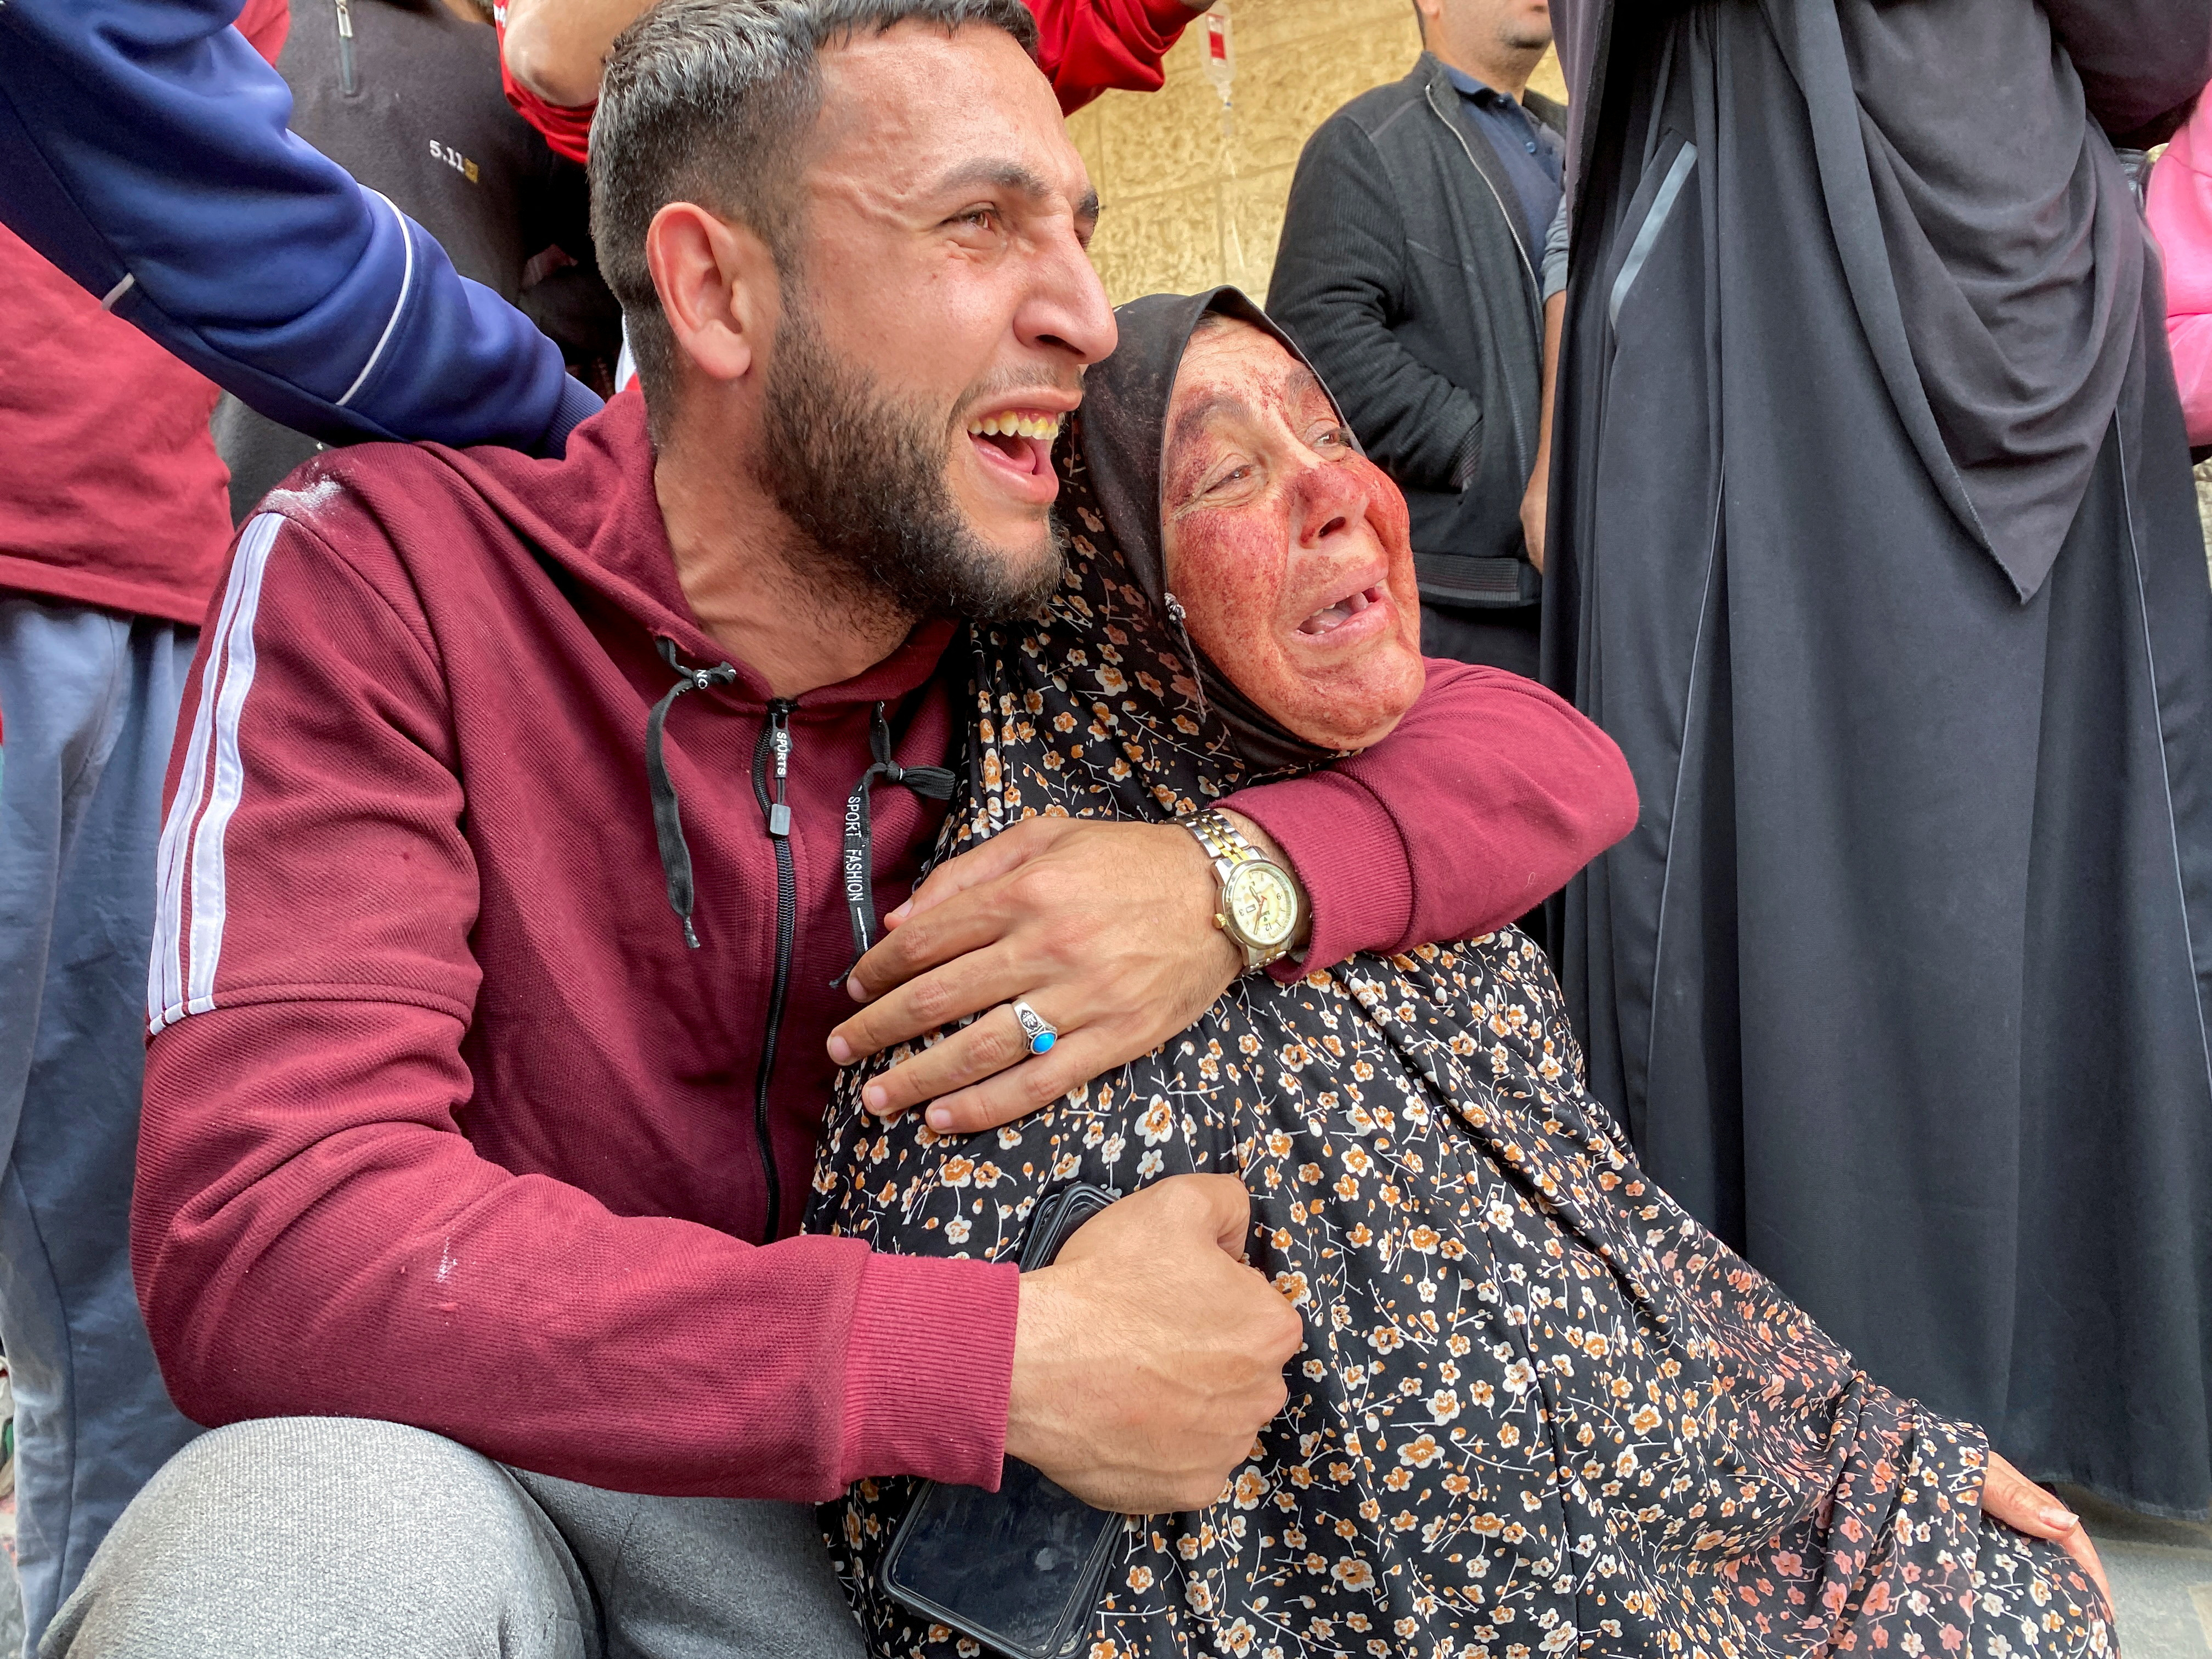 The mother of Palestinian Khalil Abu Shamala, who was killed in an Israeli strike, mourns with her face stained with his blood as Khalil's brother reacts